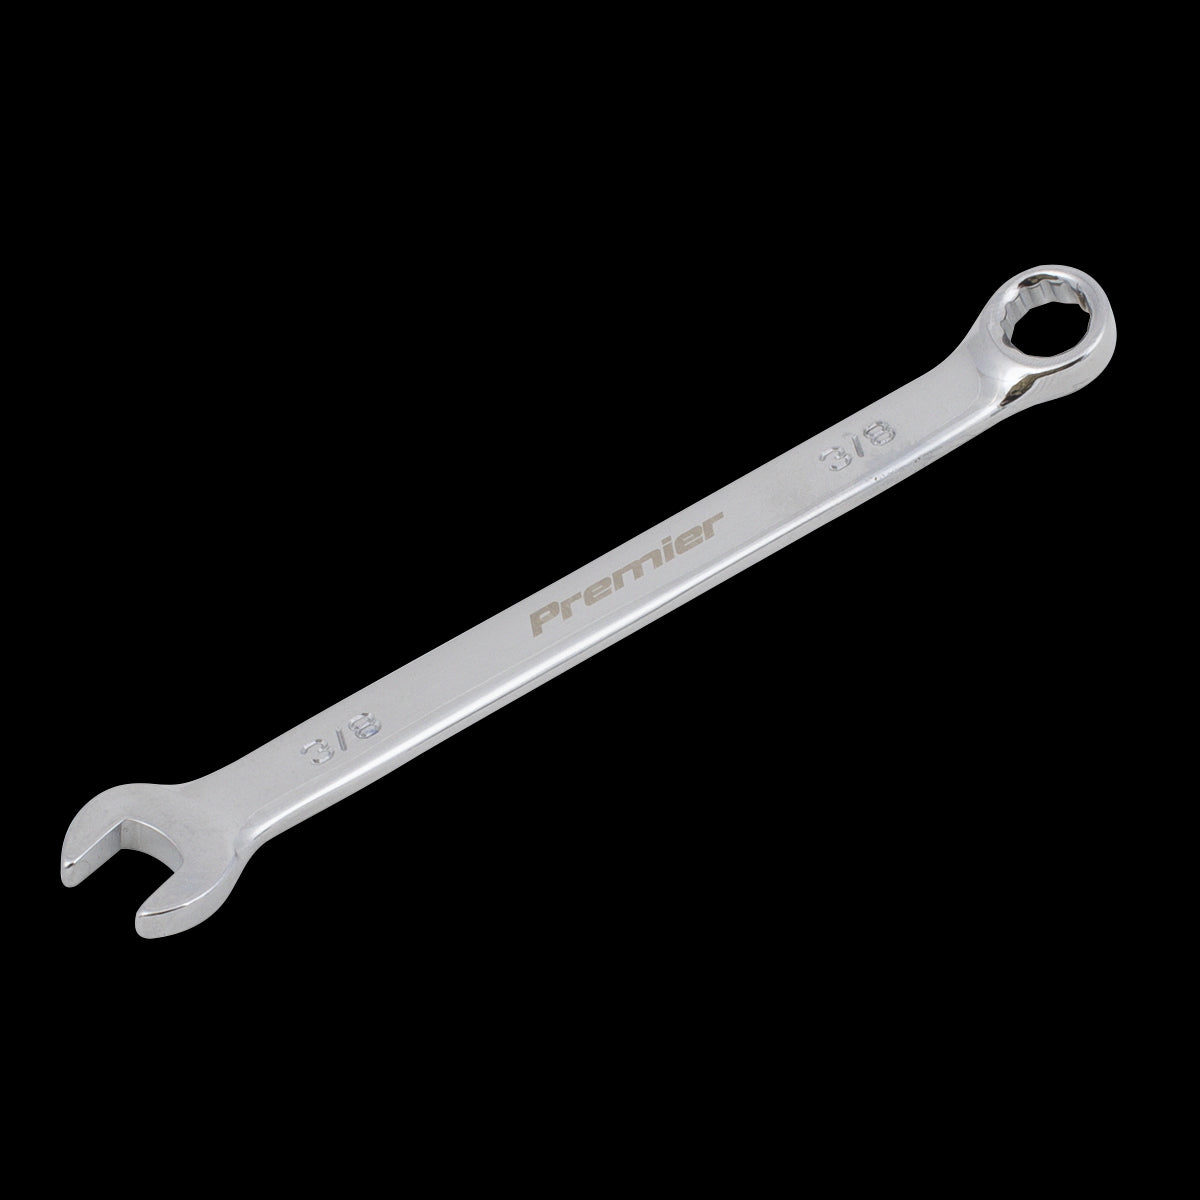 Sealey Premier Combination Spanner 3/8" - Imperial